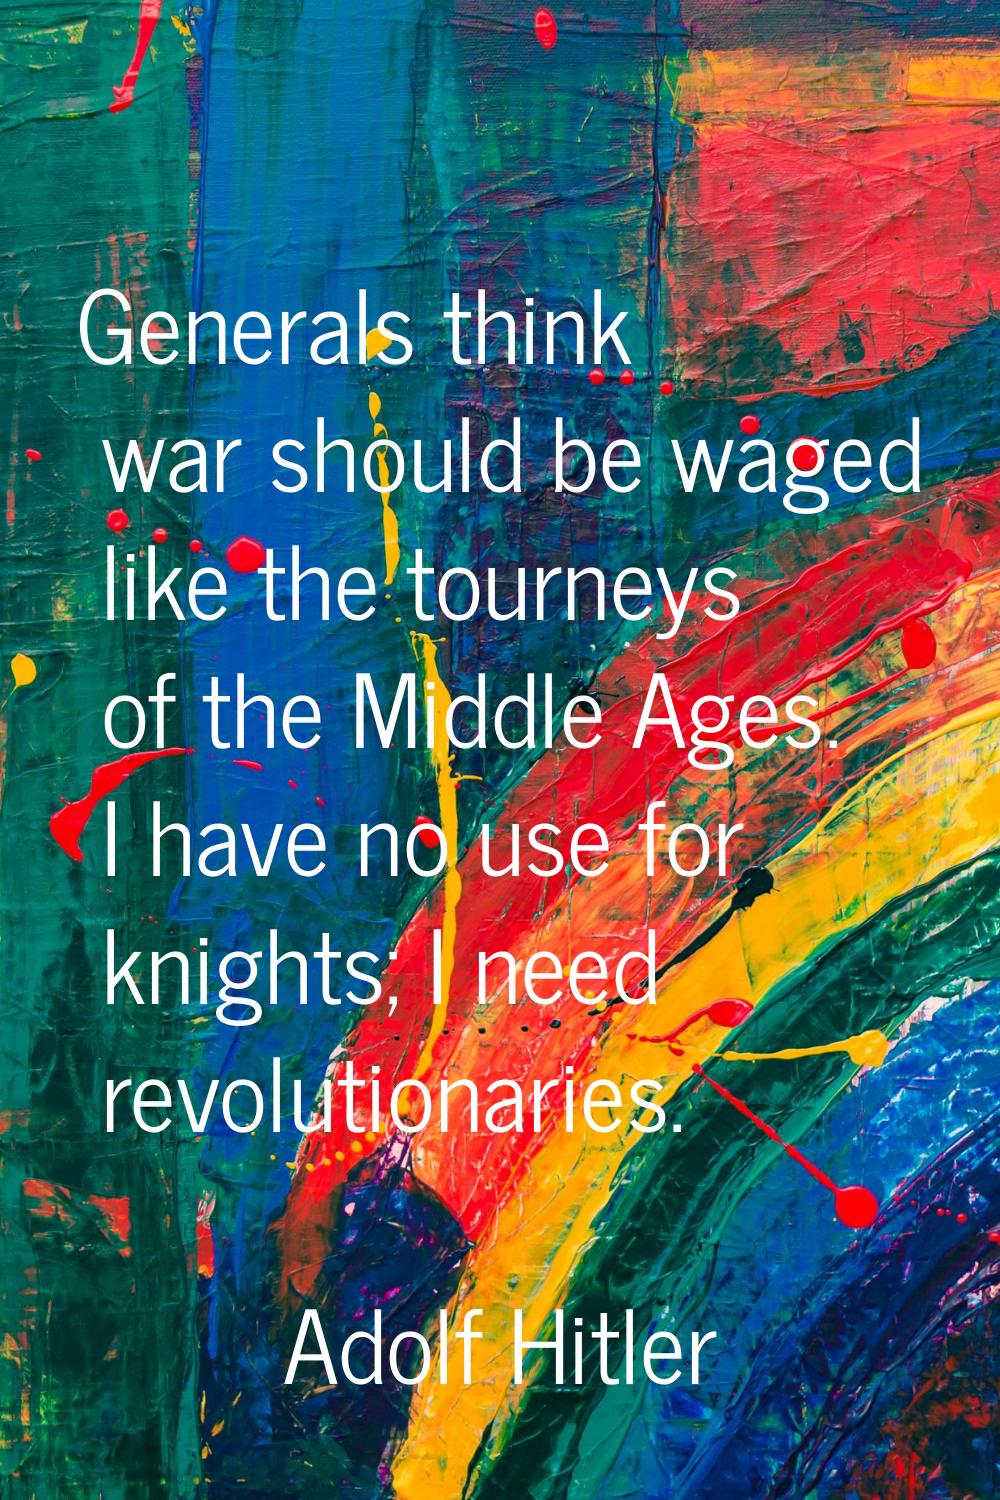 Generals think war should be waged like the tourneys of the Middle Ages. I have no use for knights;